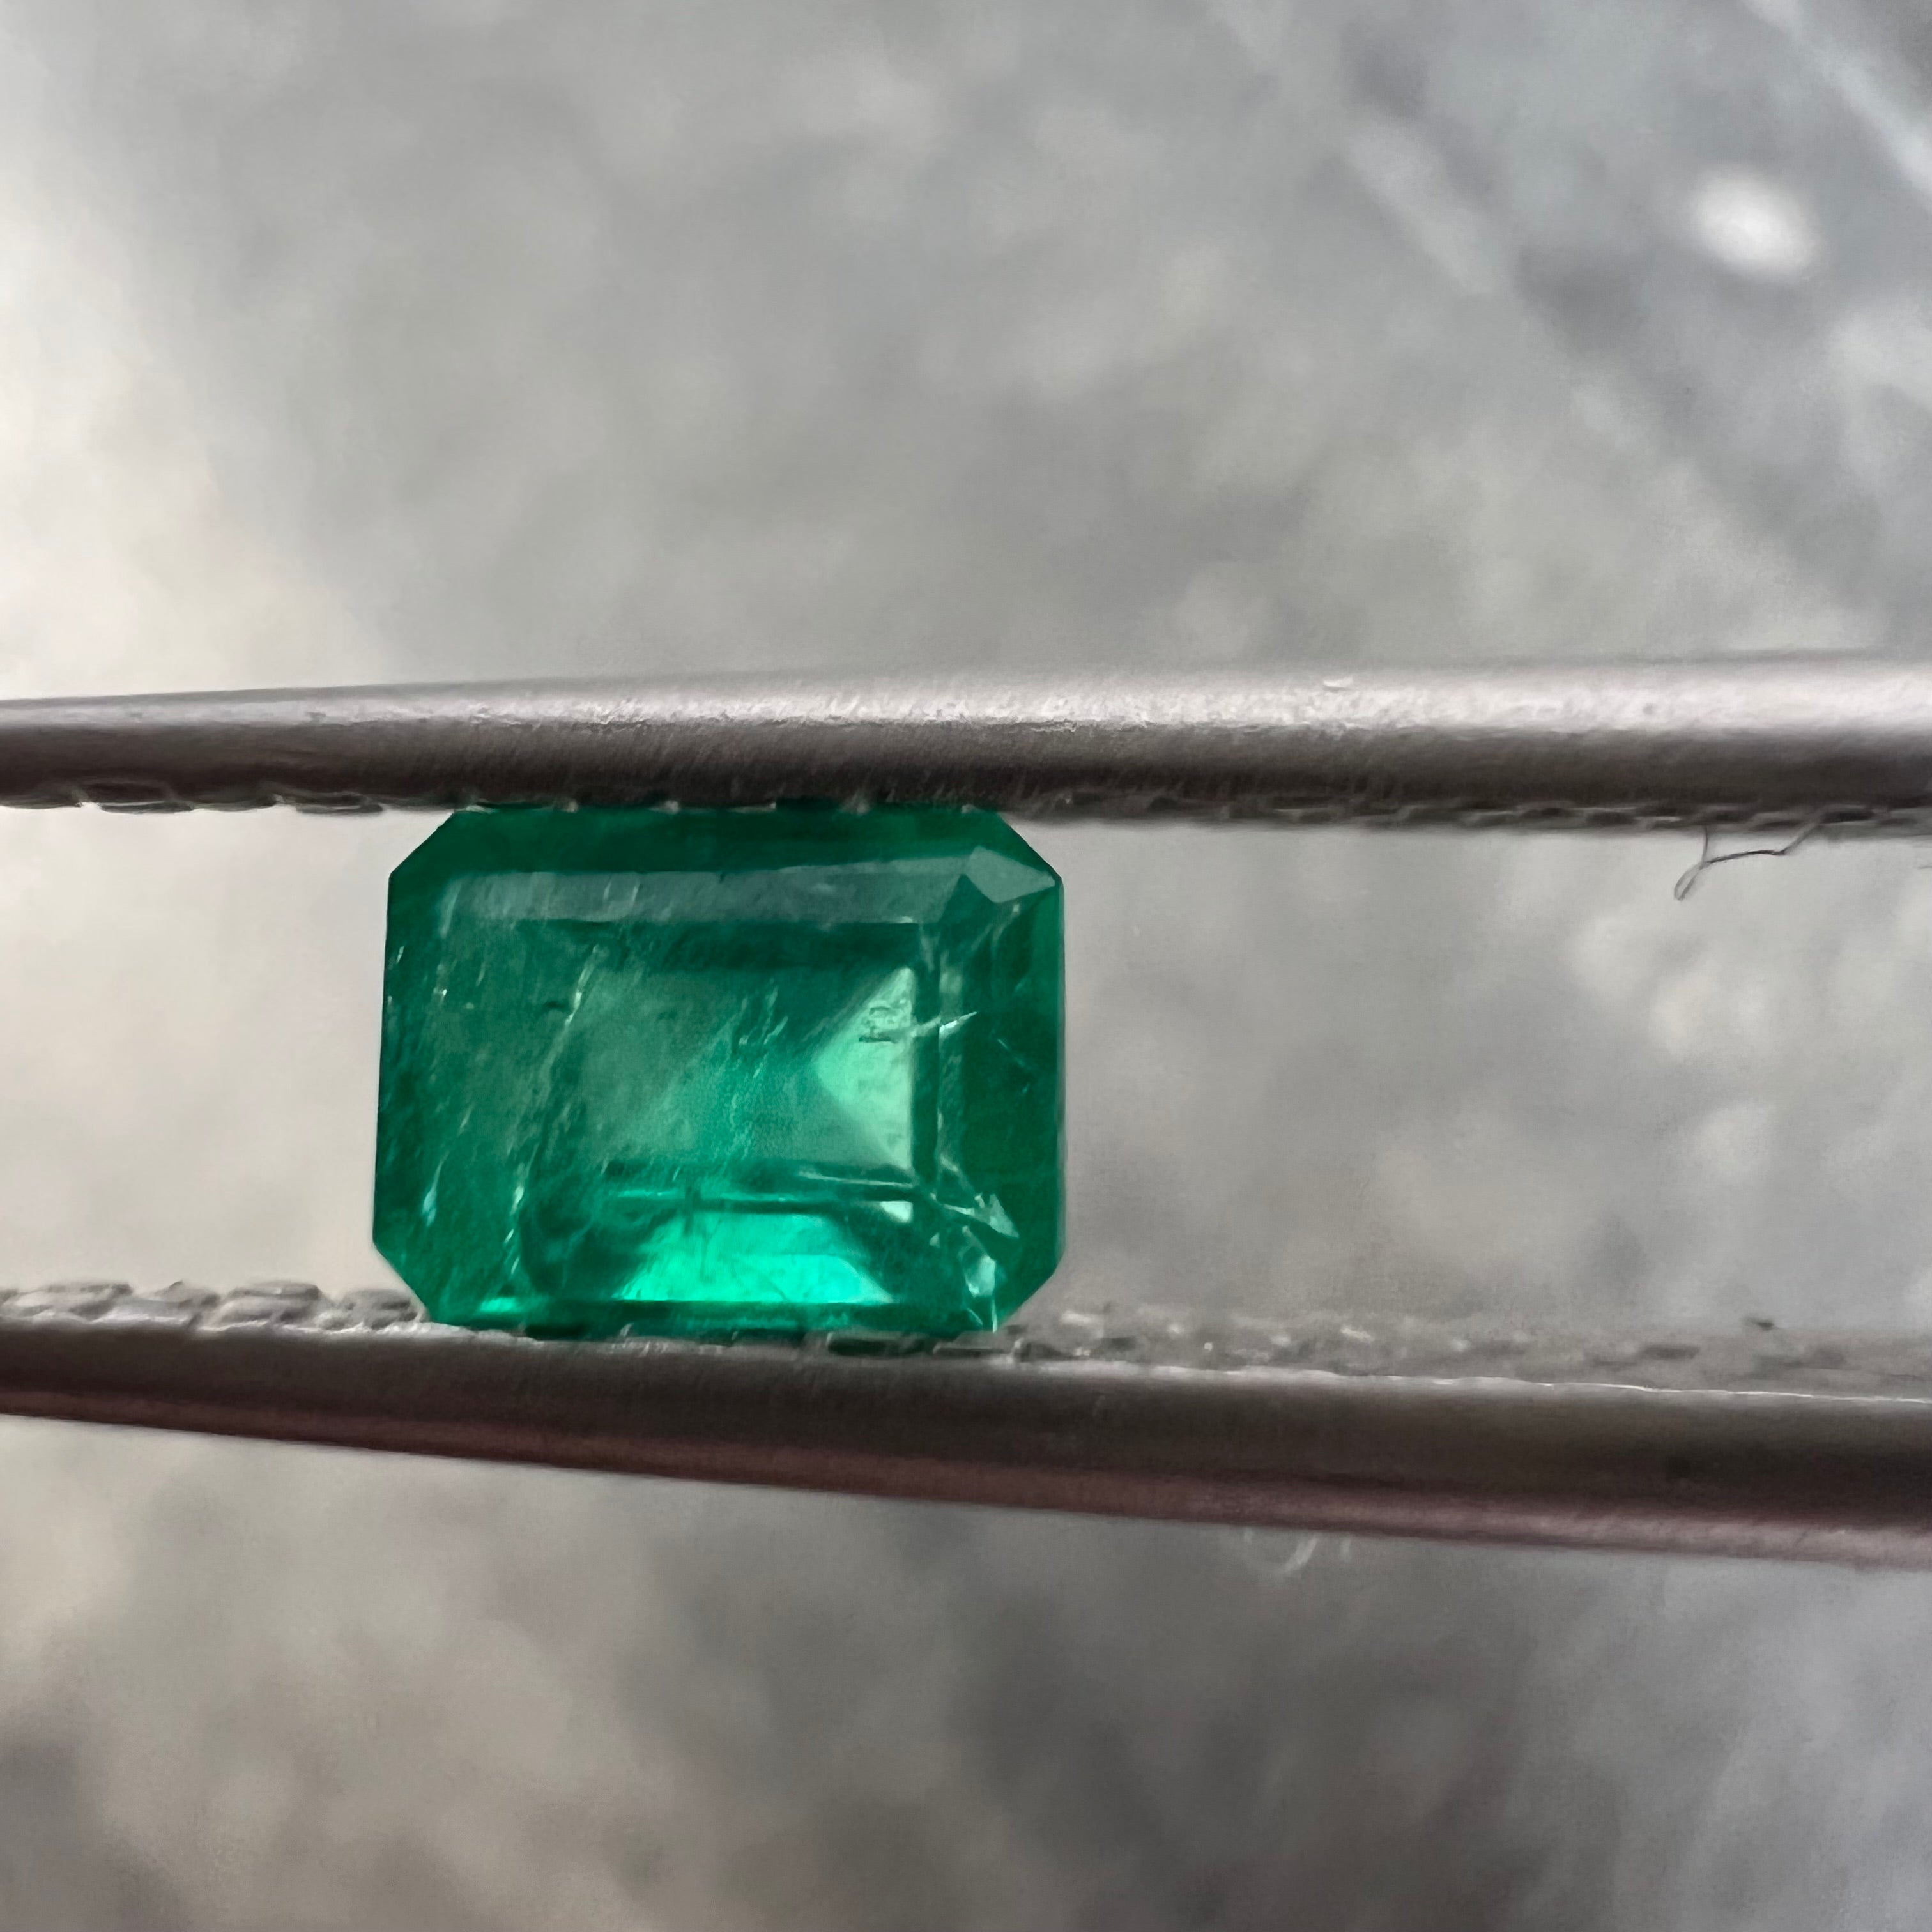 .35CT Loose Natural Colombian Emerald Cut 4.66x3.49x2.82mm Earth mined Gemstone